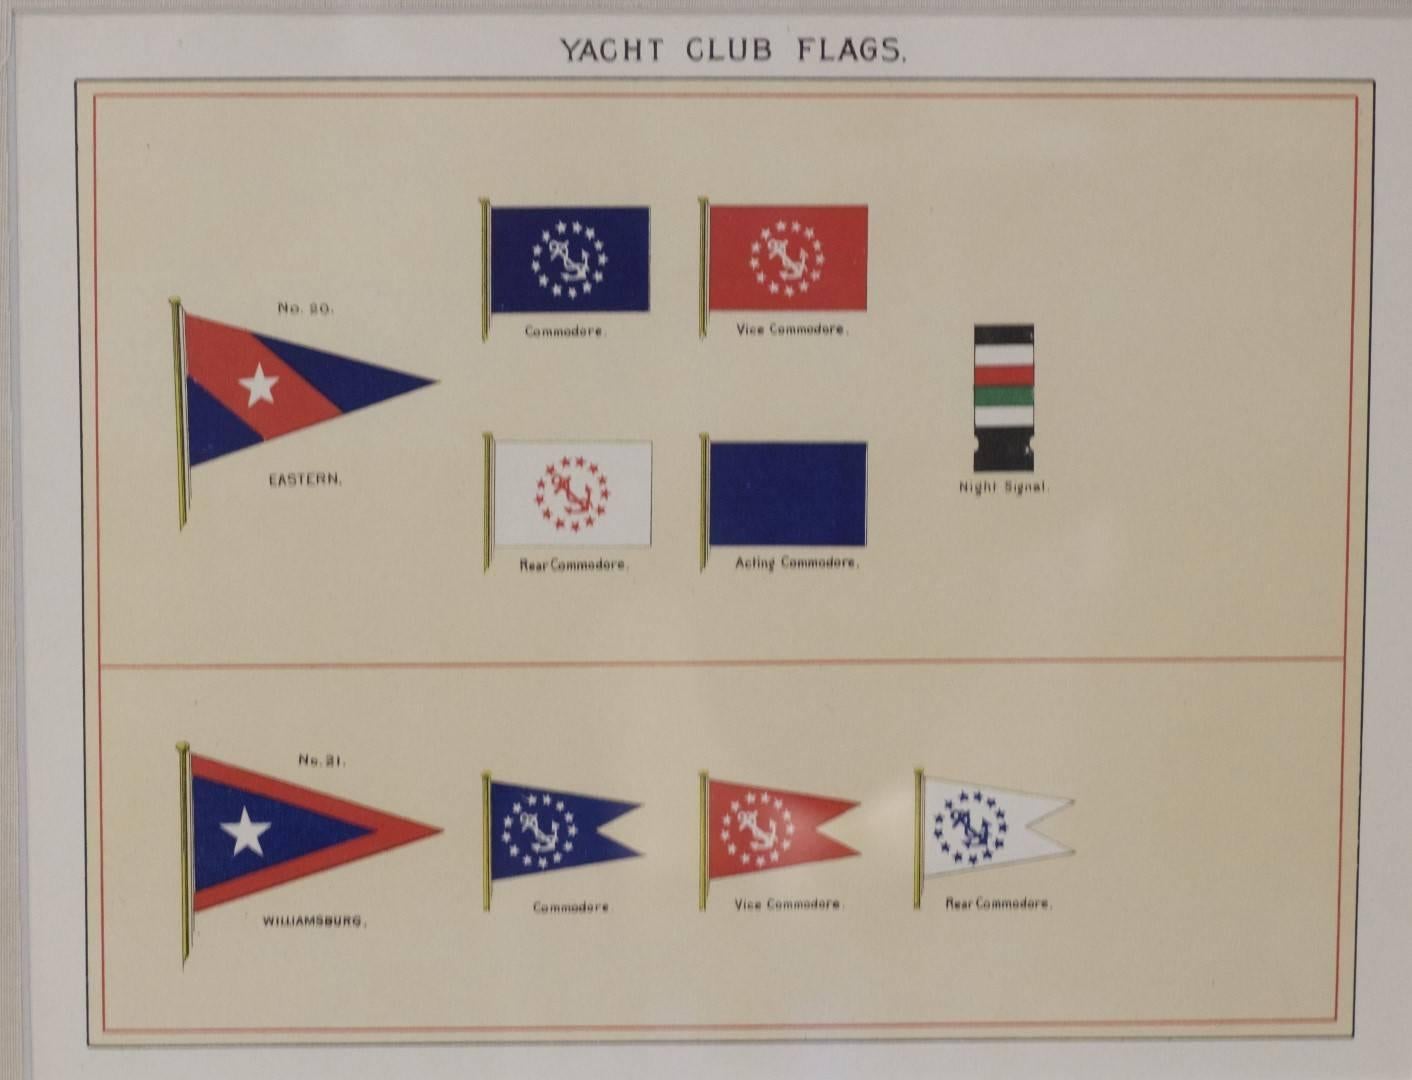 Framed print showing the private signals of yacht owners on linen matting. Dimensions: 13